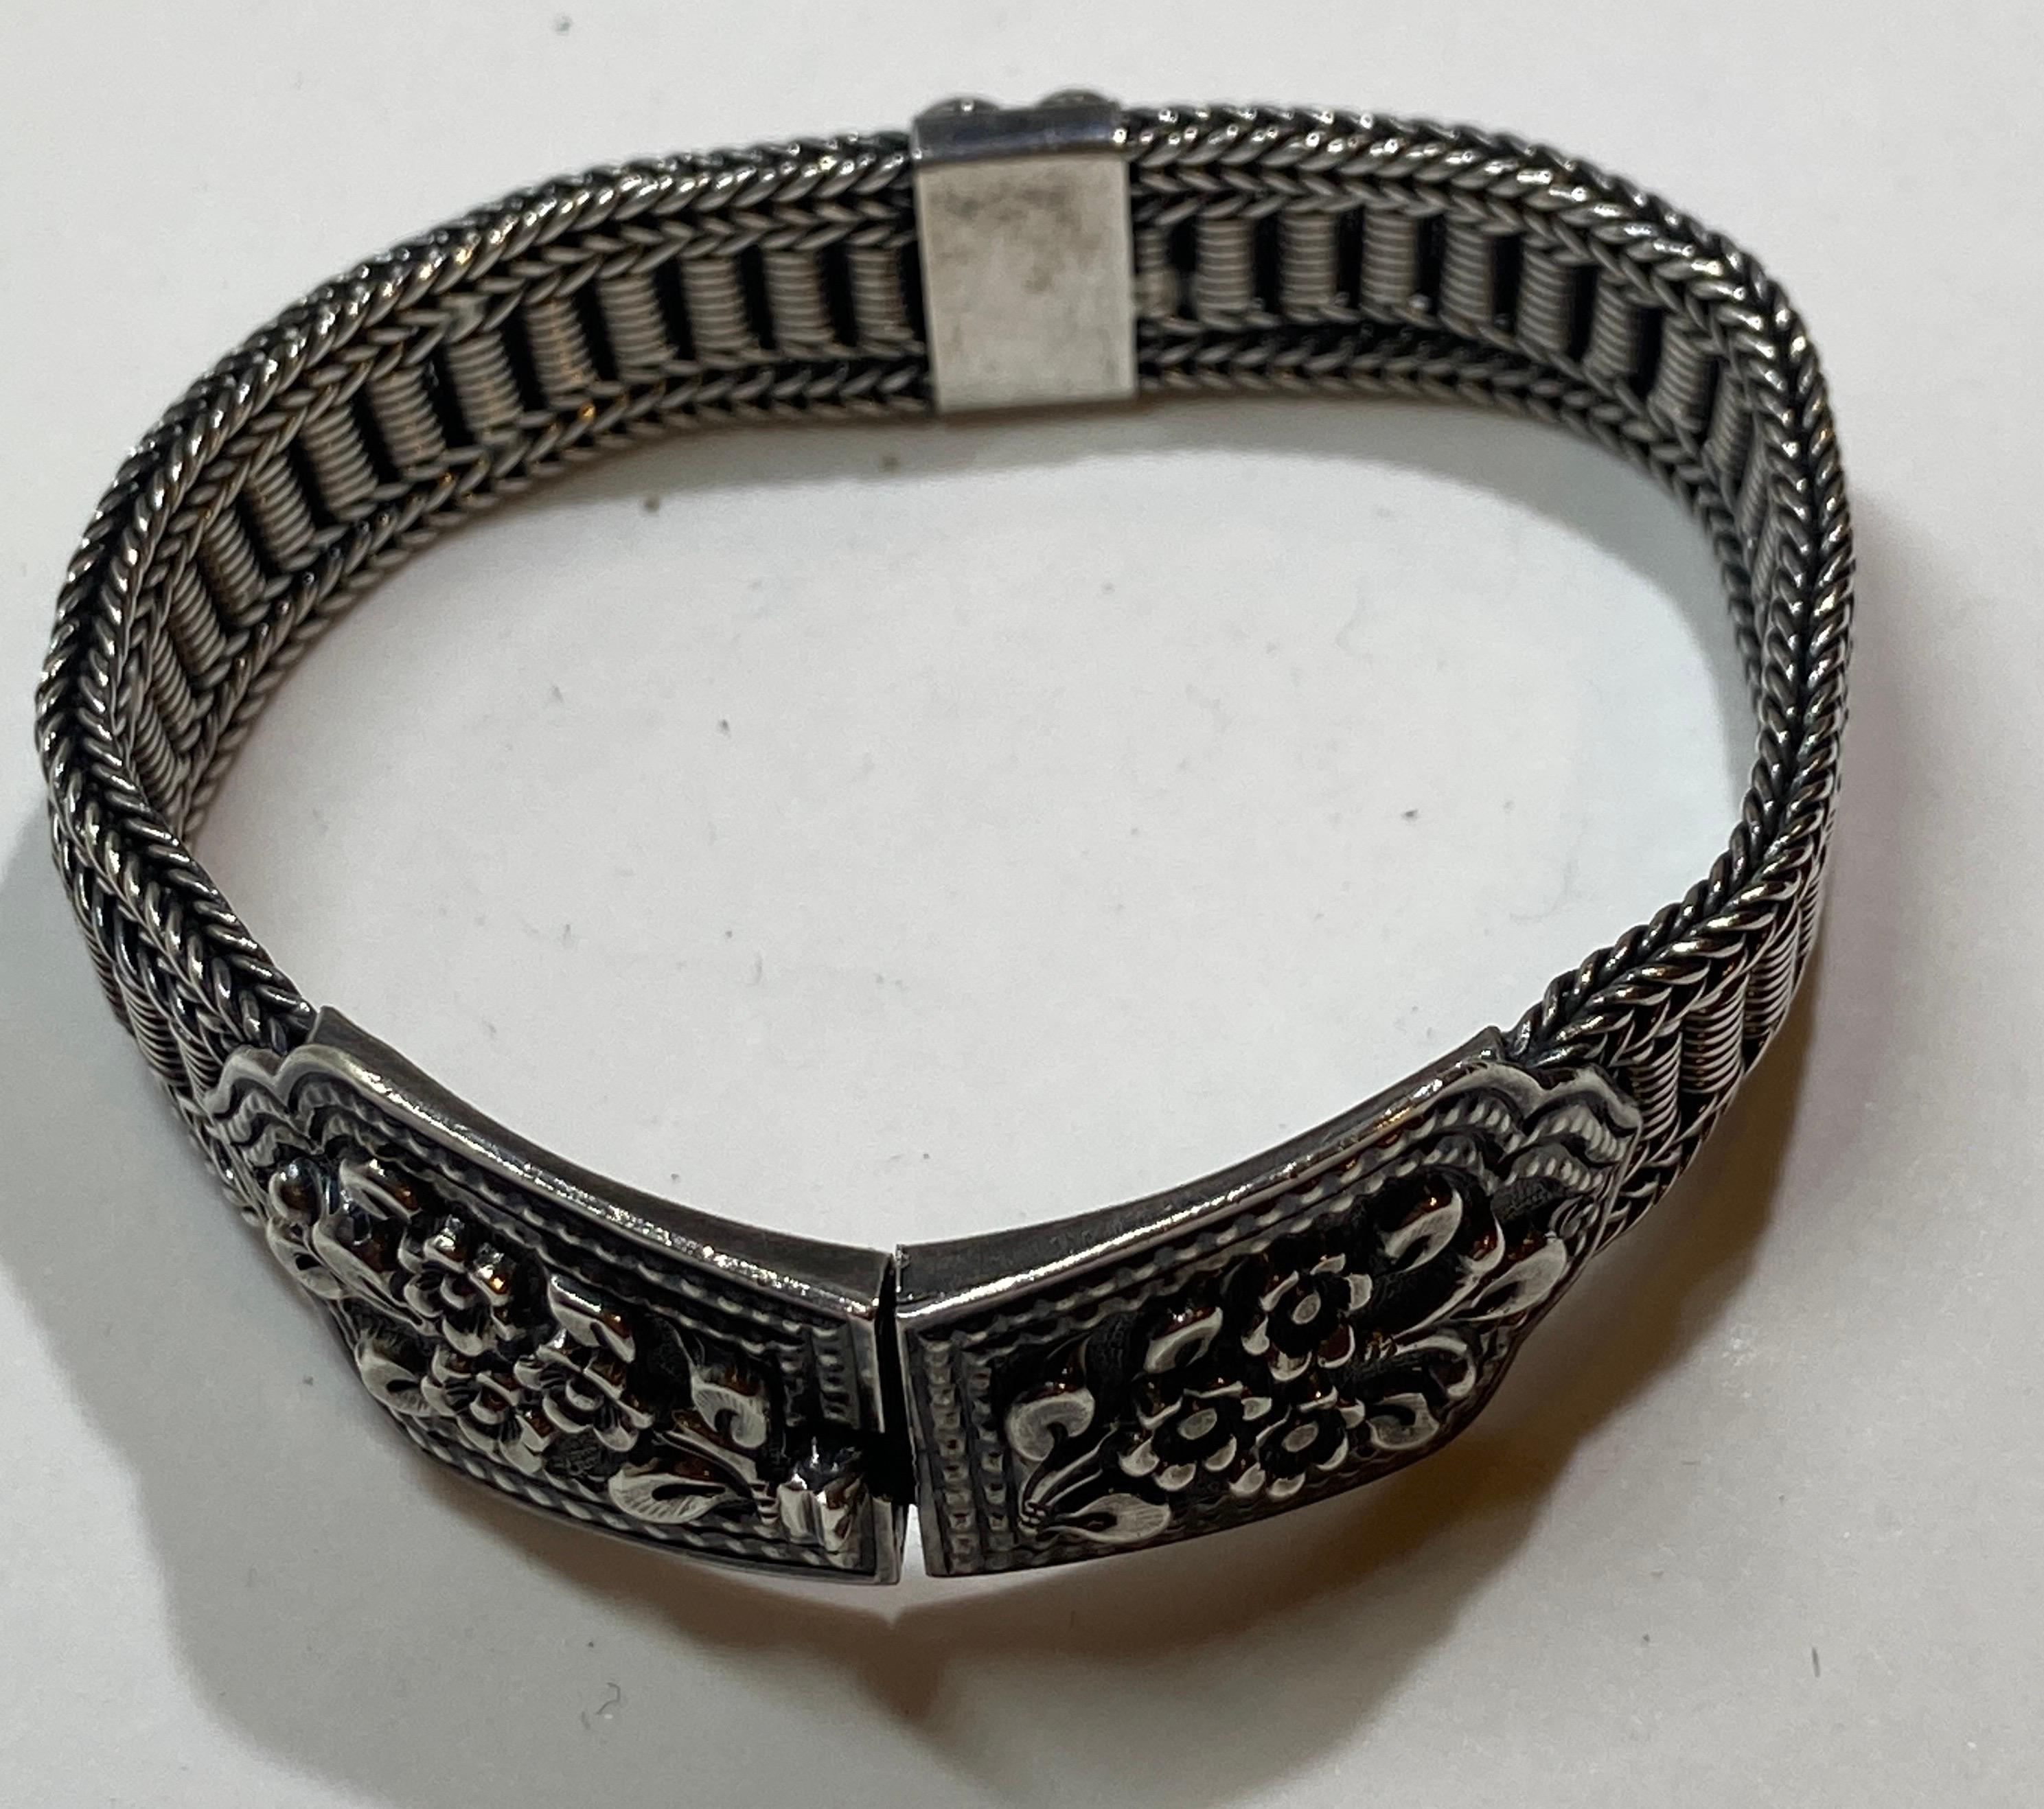 This superbly detailed victorian sterling silver with floral accents clasp bracelet measures 7 1/2 inches in length. The width measures 1/2 inch to 6/8 inch. woven and finely braided throughout, the opening clasp has a 'click'. Interior is etched